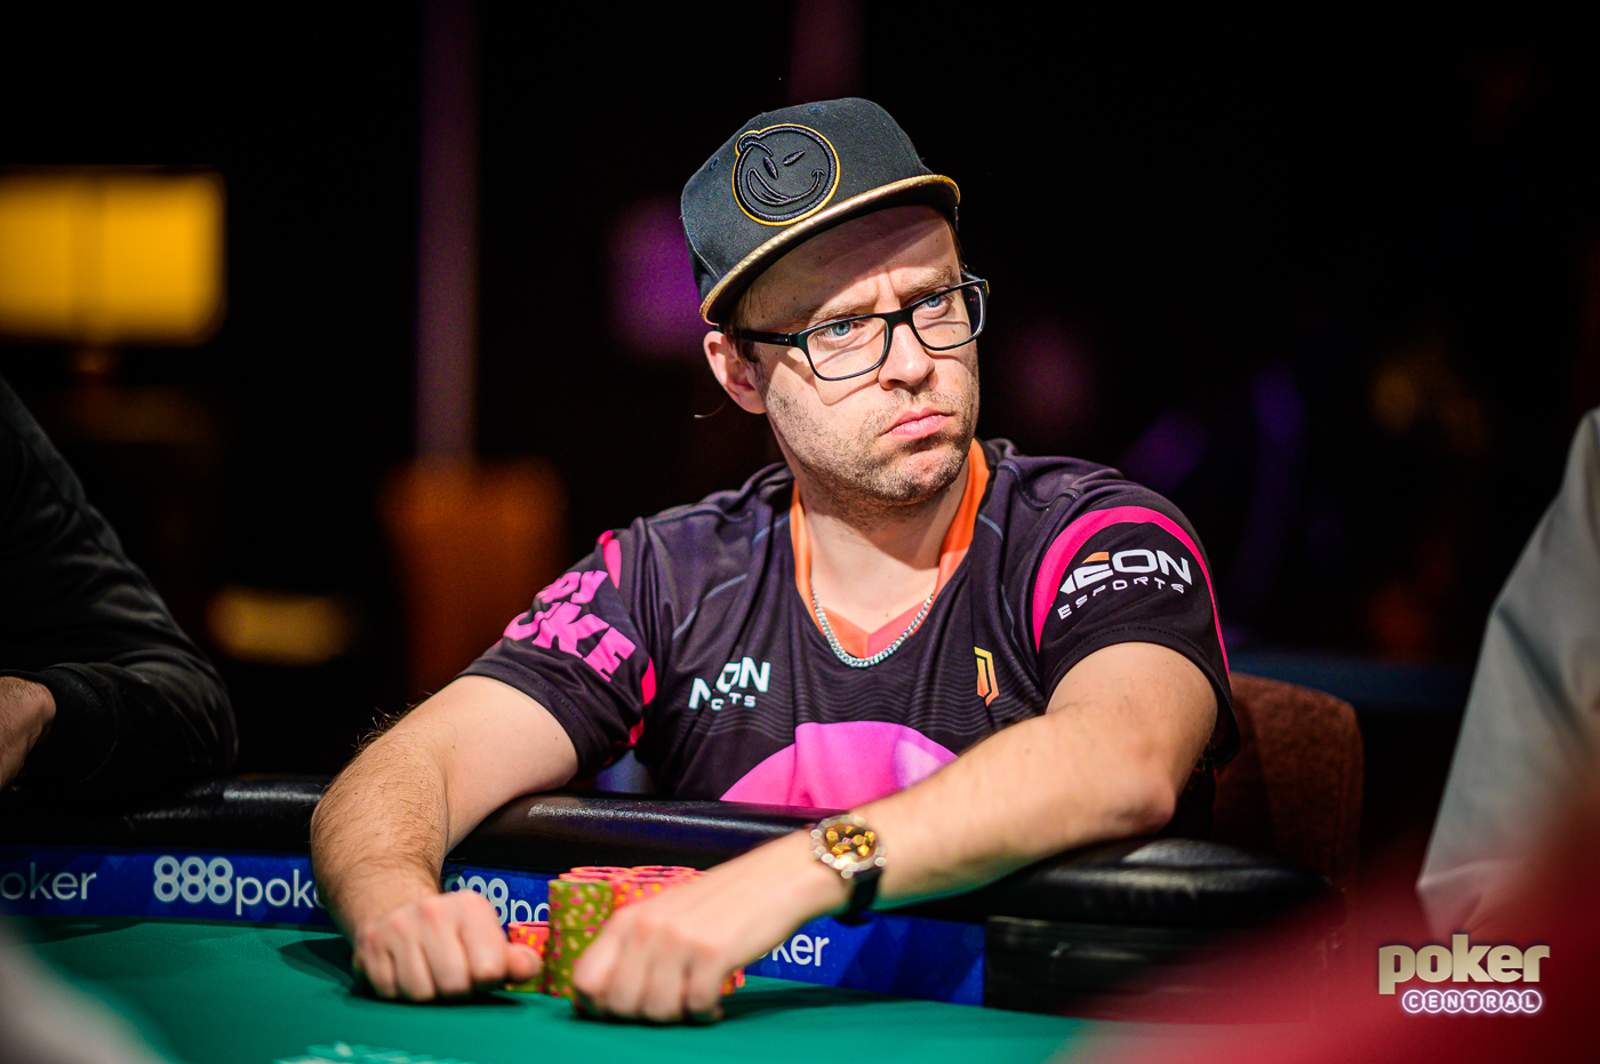 Daniel Negreanu Loses WSOP Player of the Year Title to Robert Campbell